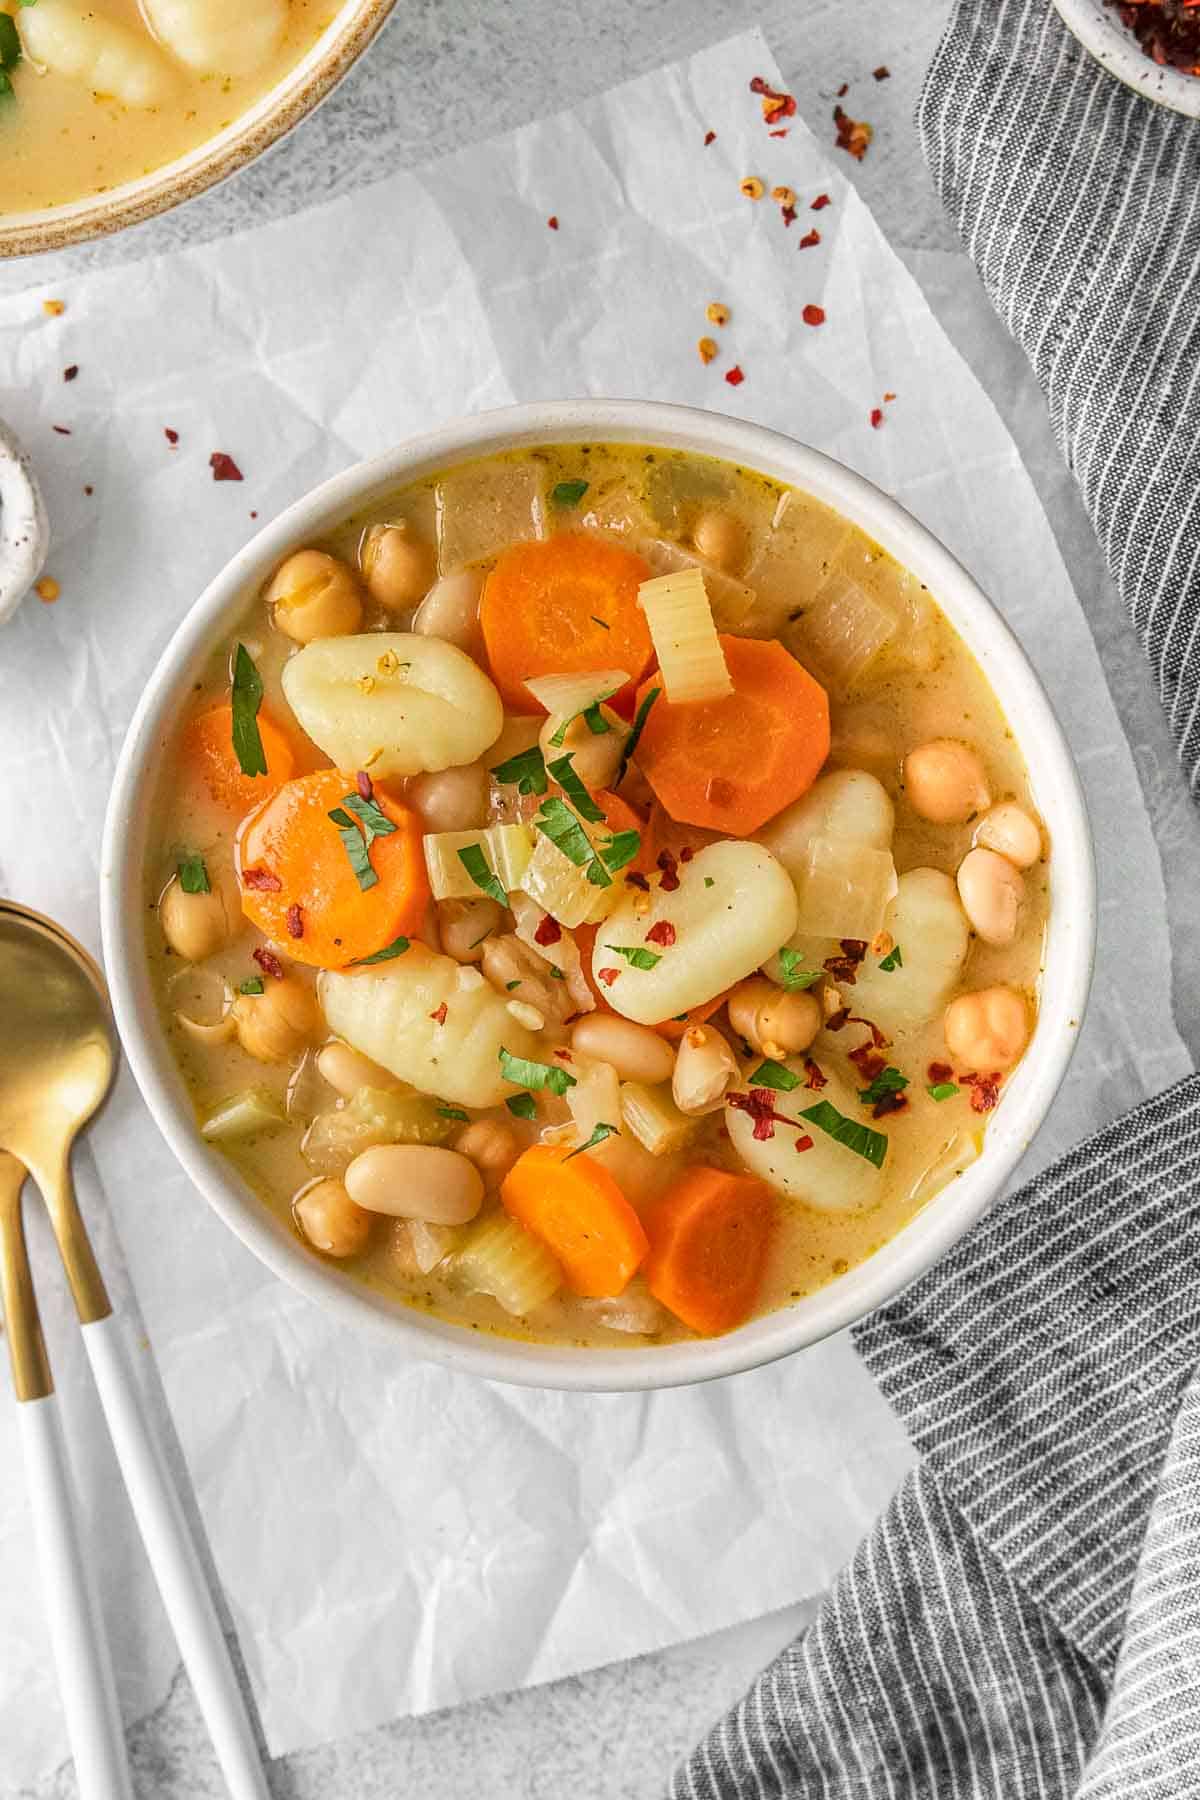 A bowl of gnocchi soup with carrots and white beans.